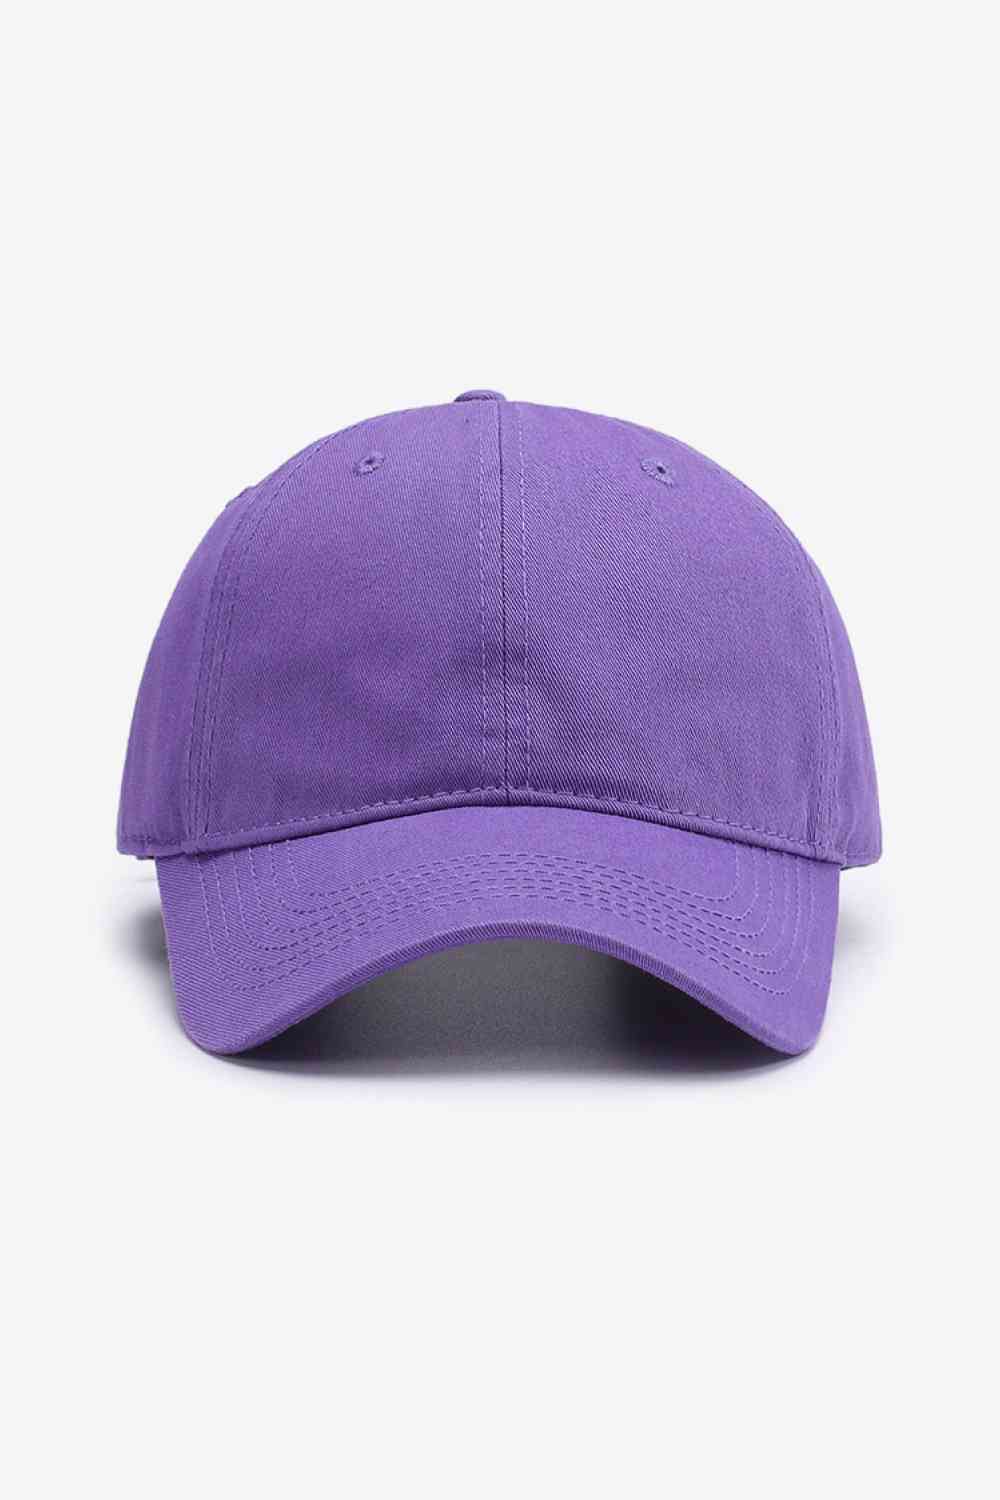 Cool and Classic Baseball Cap Purple One Size